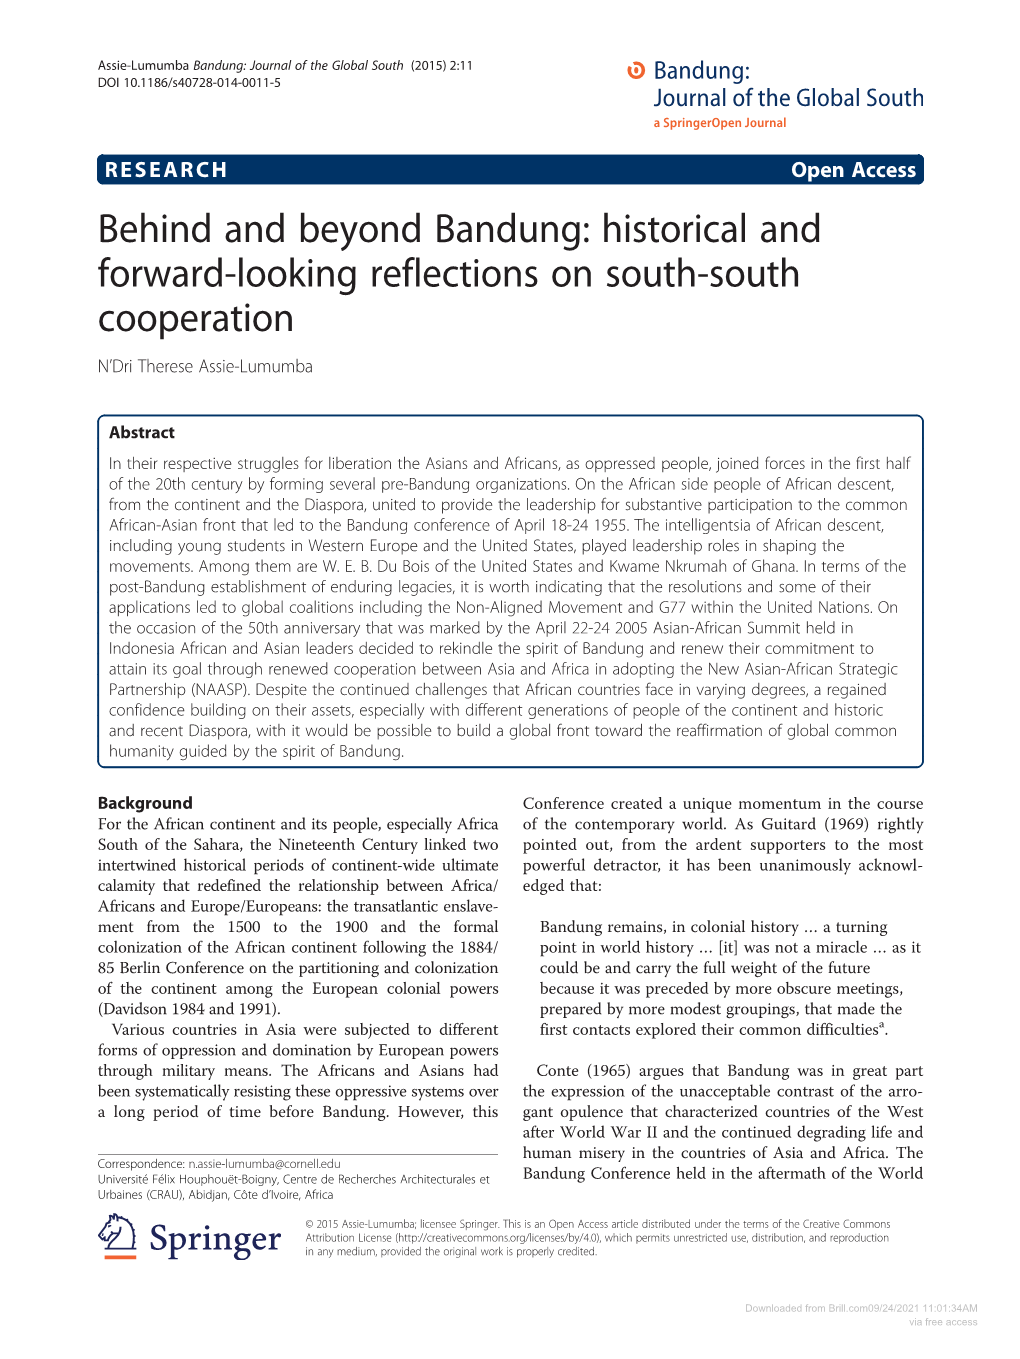 Behind and Beyond Bandung: Historical and Forward-Looking Reflections on South-South Cooperation N’Dri Therese Assie-Lumumba